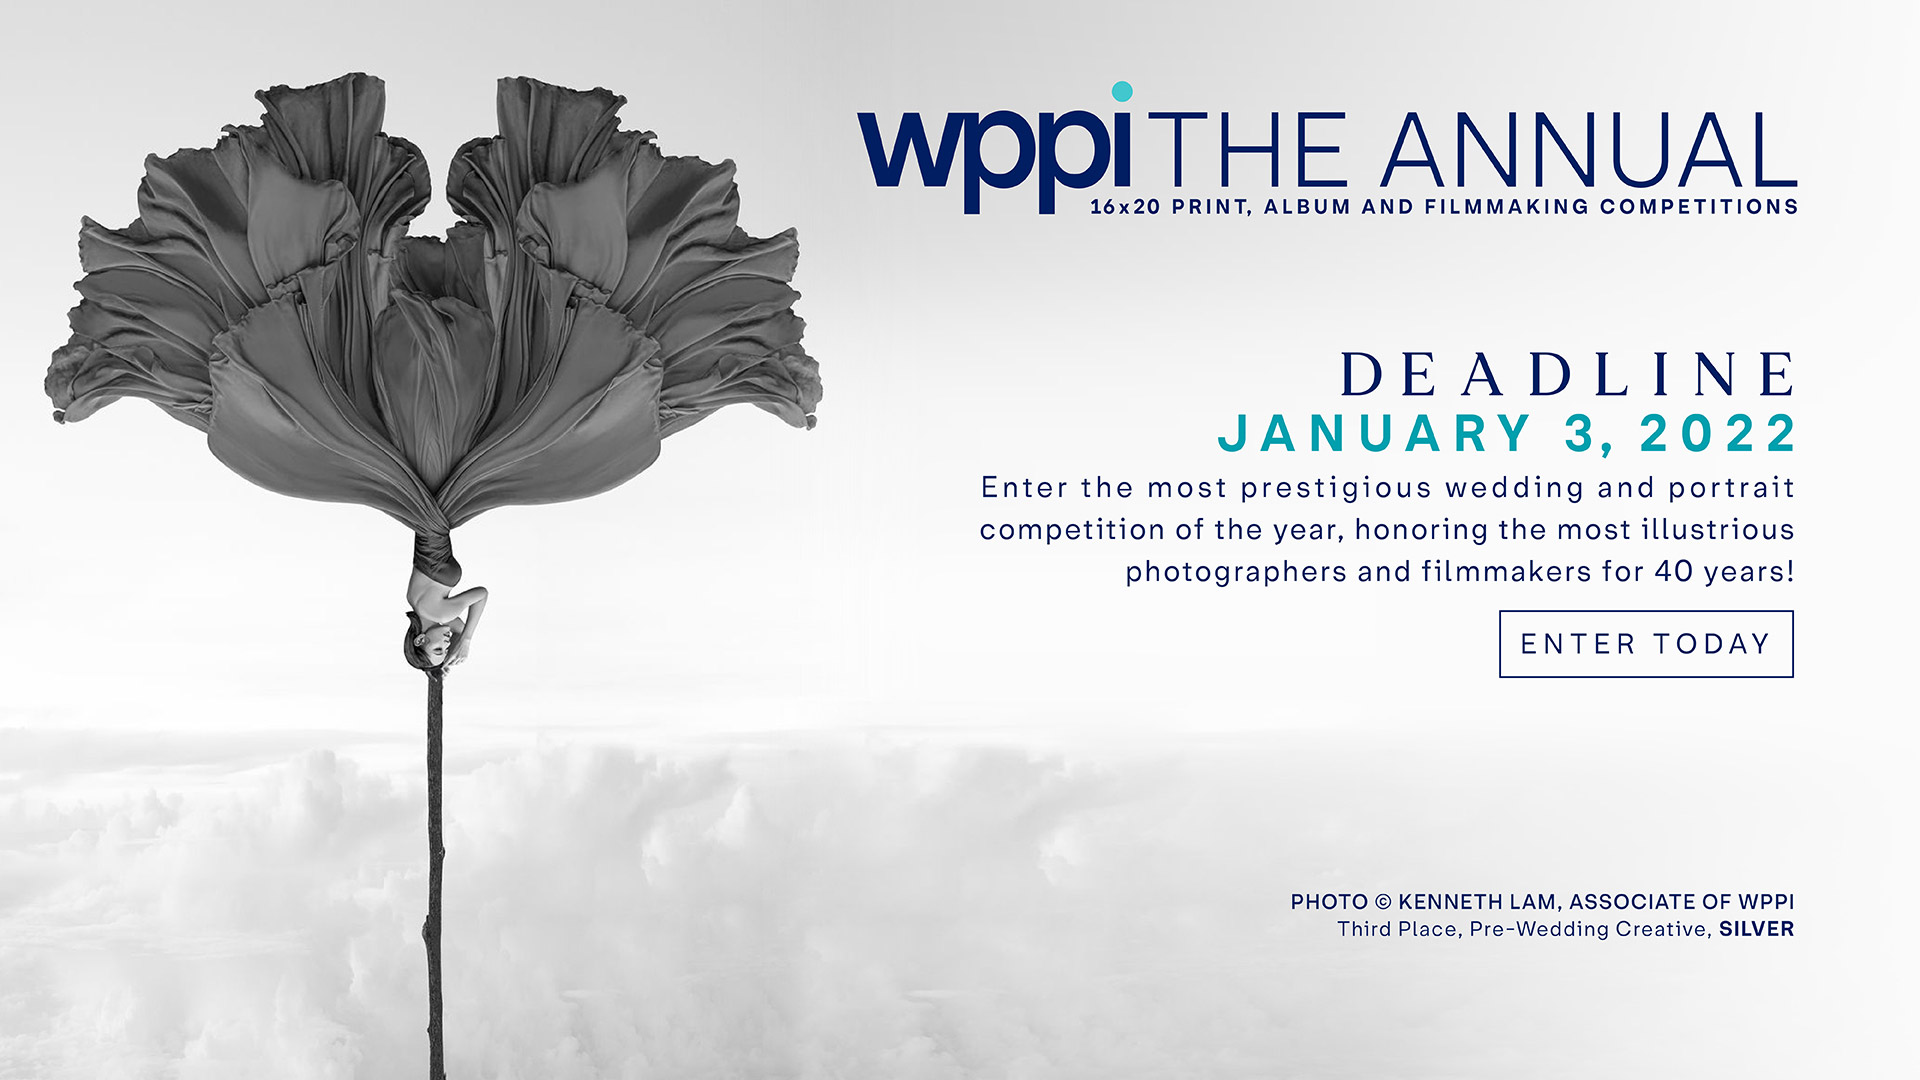 WPPI The Annual 2022 image